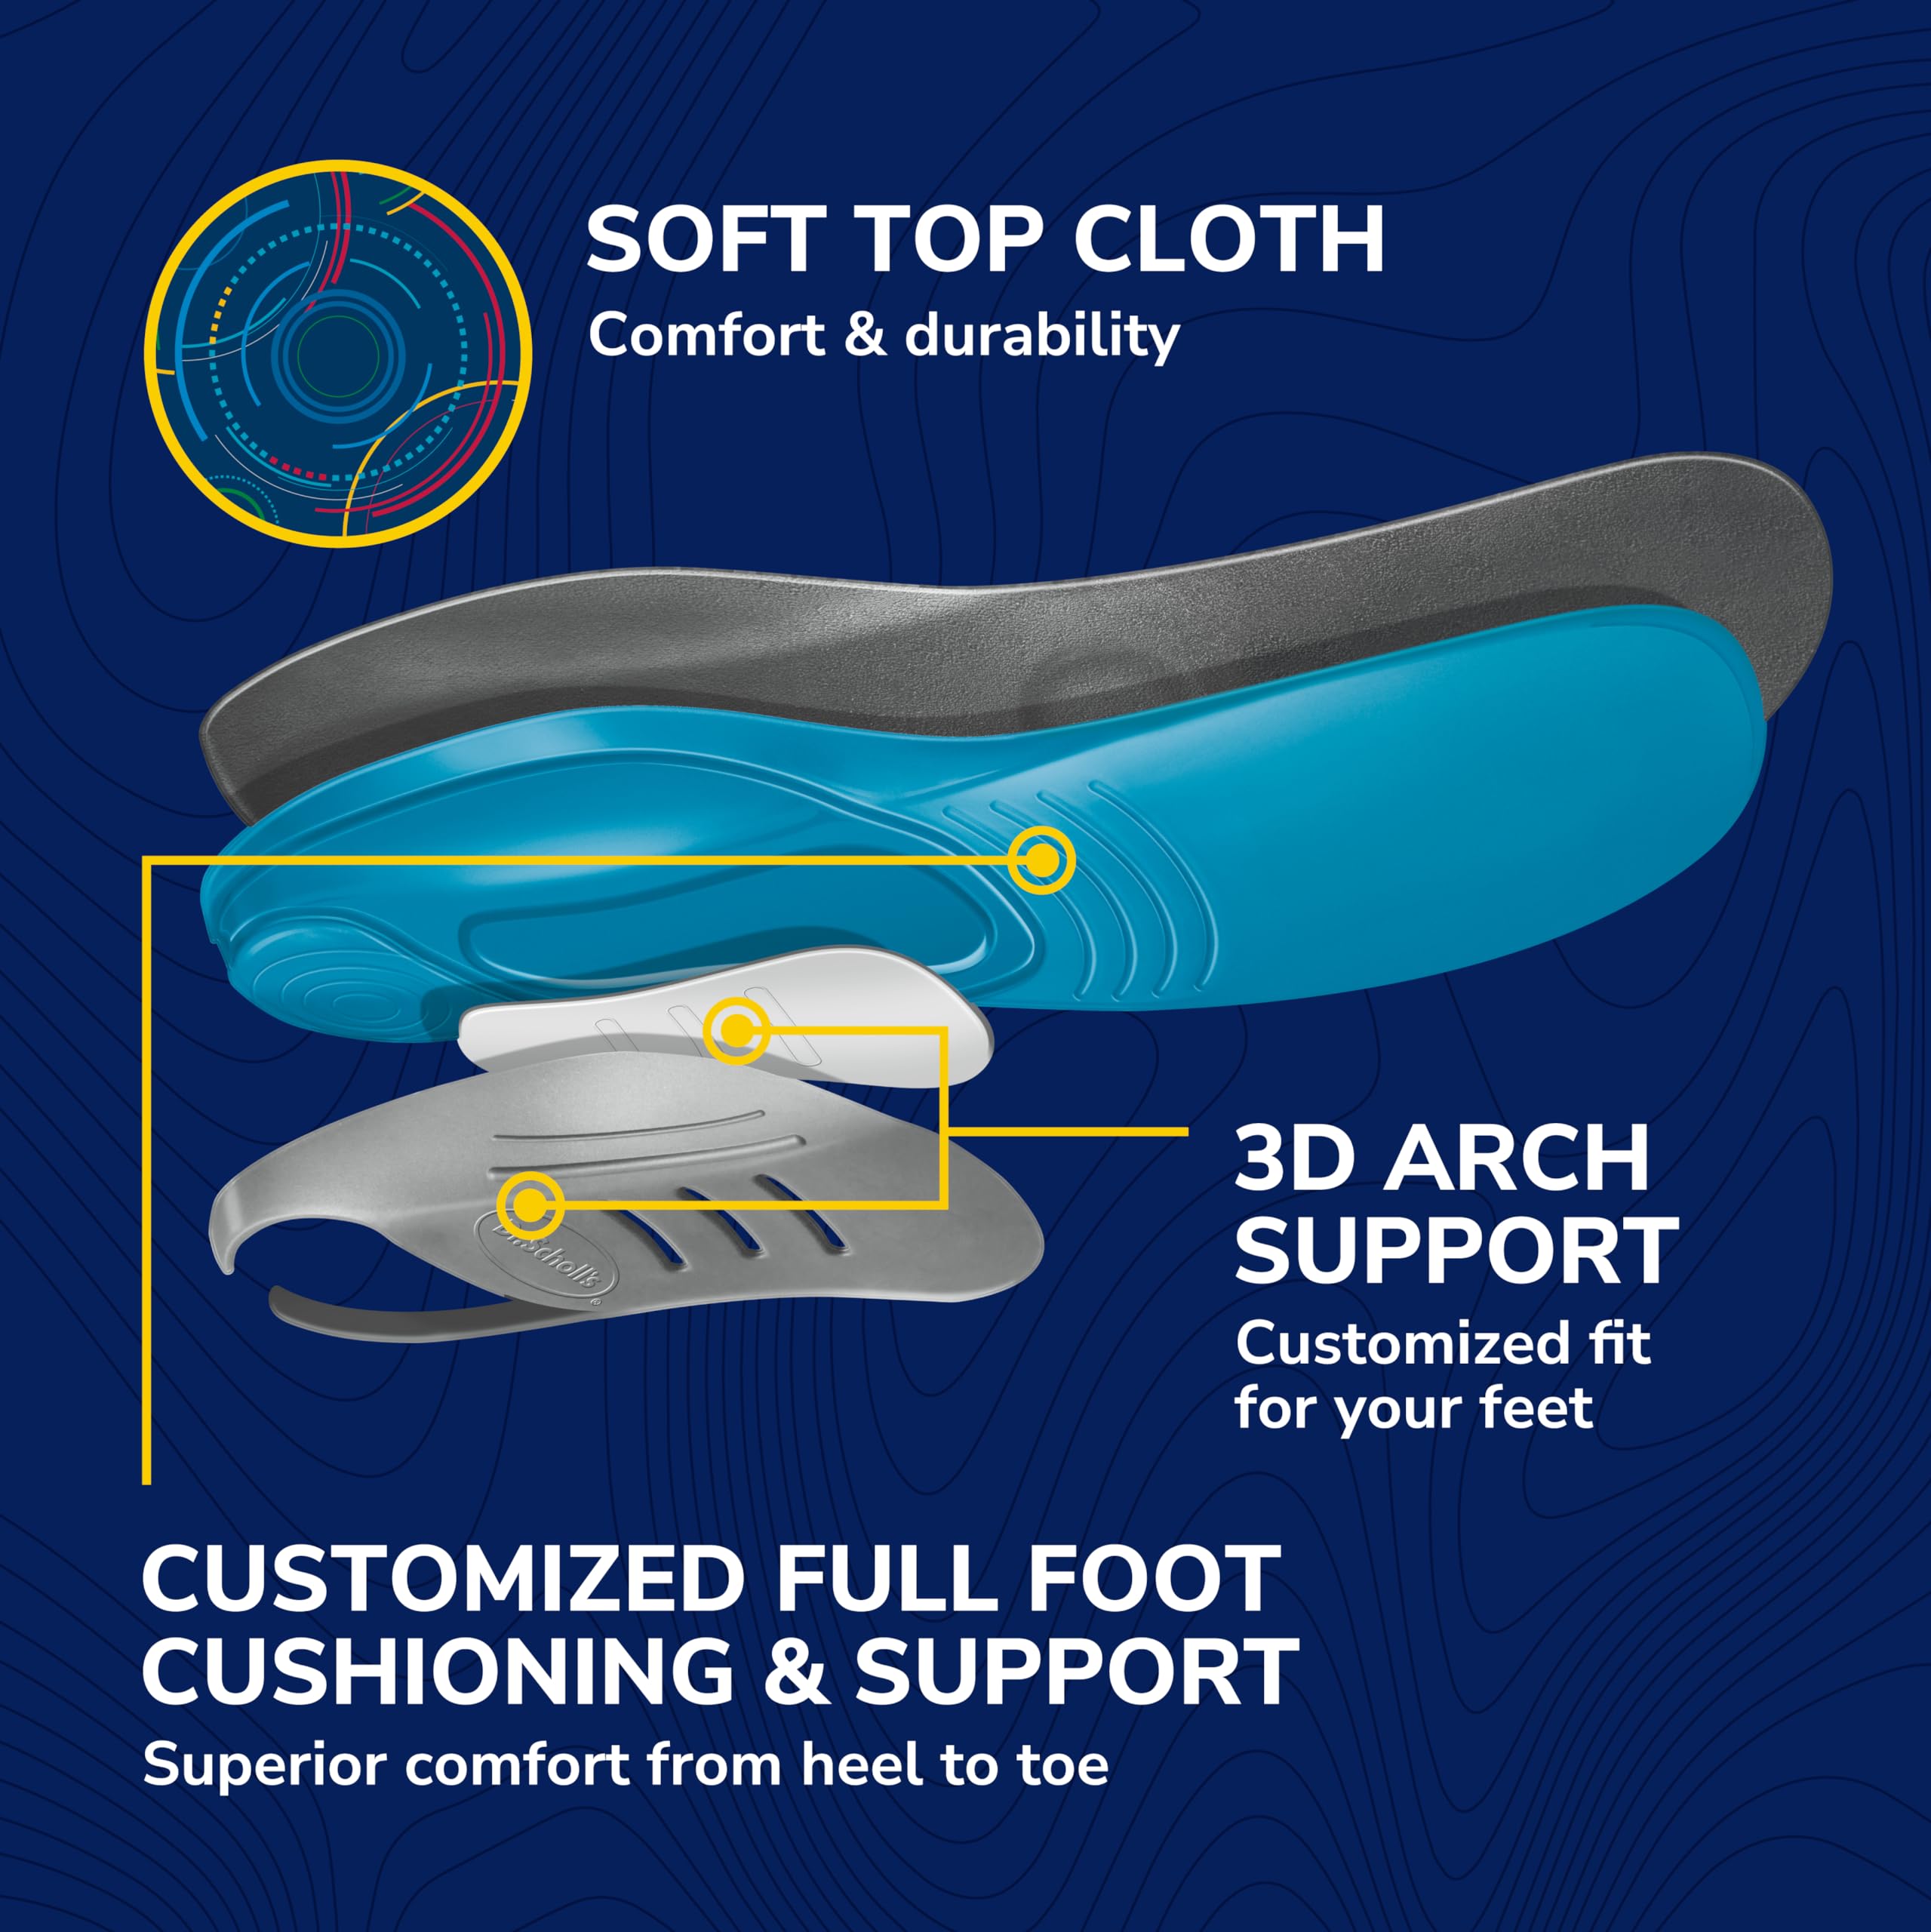 Dr. Scholl’s Custom Fit Orthotics 3/4 Length Inserts, CF 680, Customized for Your Foot & Arch, Immediate All-Day Pain Relief, Lower Back, Knee, Plantar Fascia, Heel, Insoles Fit Men & Womens Shoes